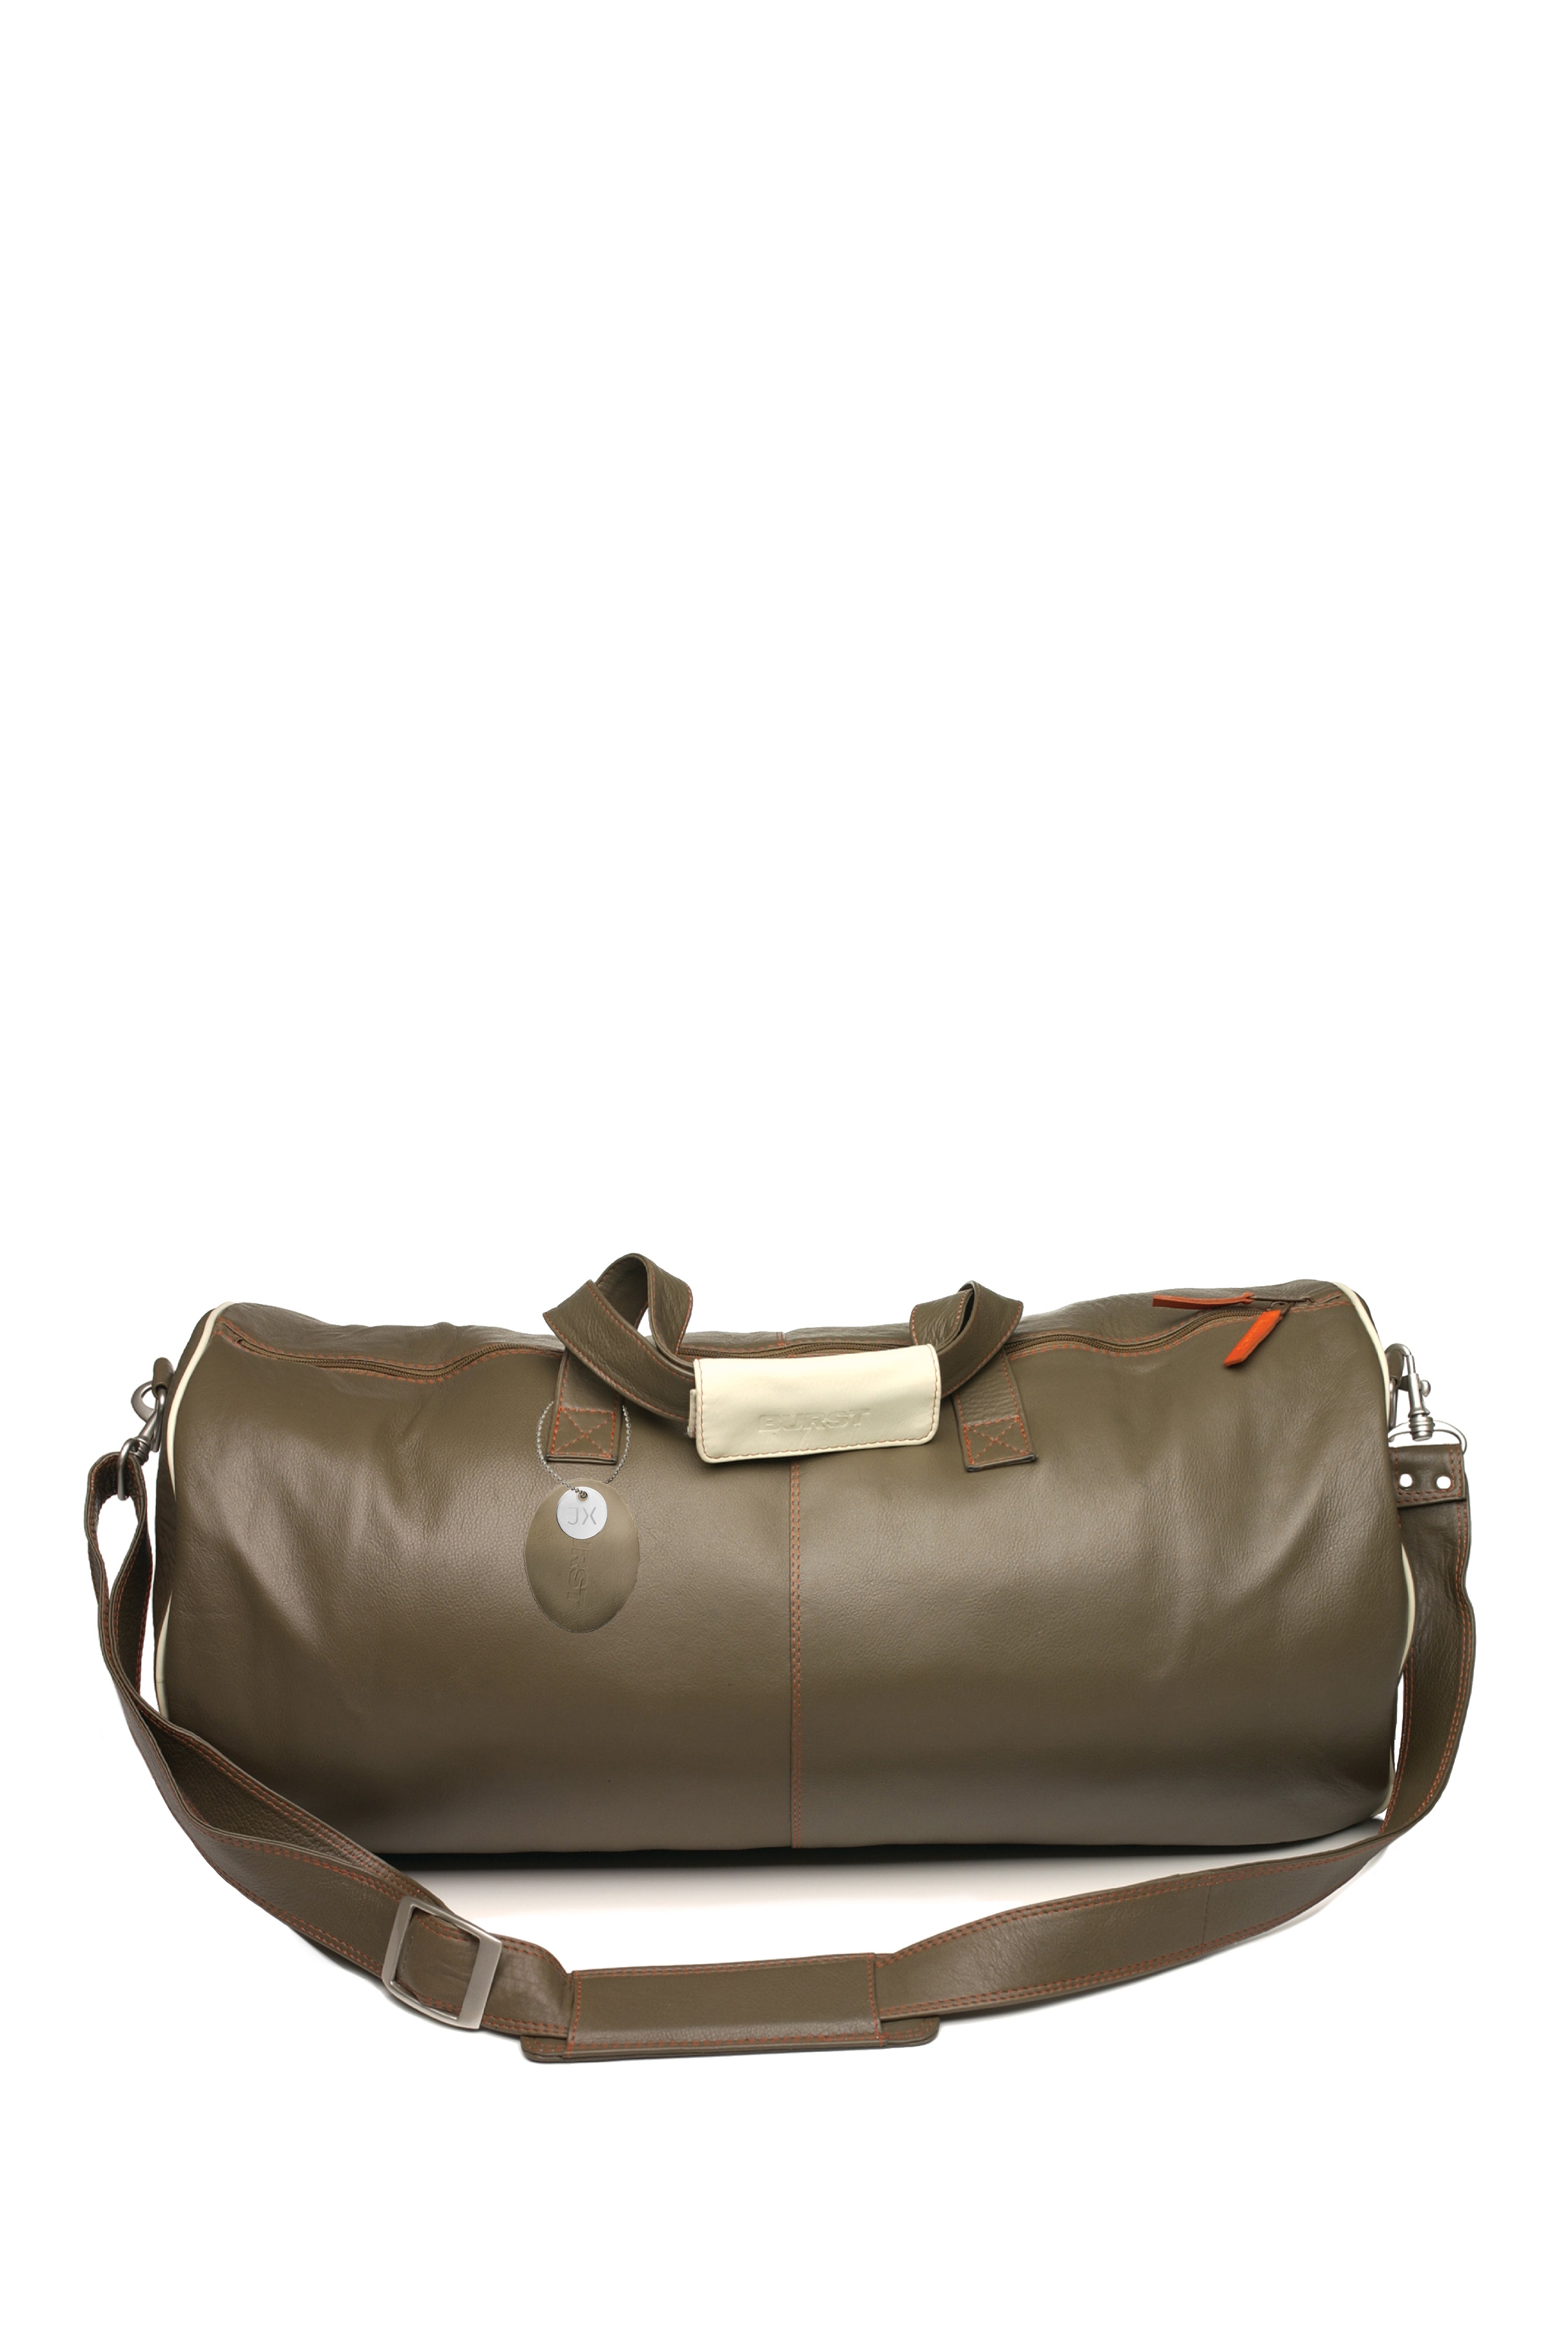  Pebbled soft leather round duffel bag, removable shoulder strap, handles. Olive with cream & orange accents. Upcycled Sustainable